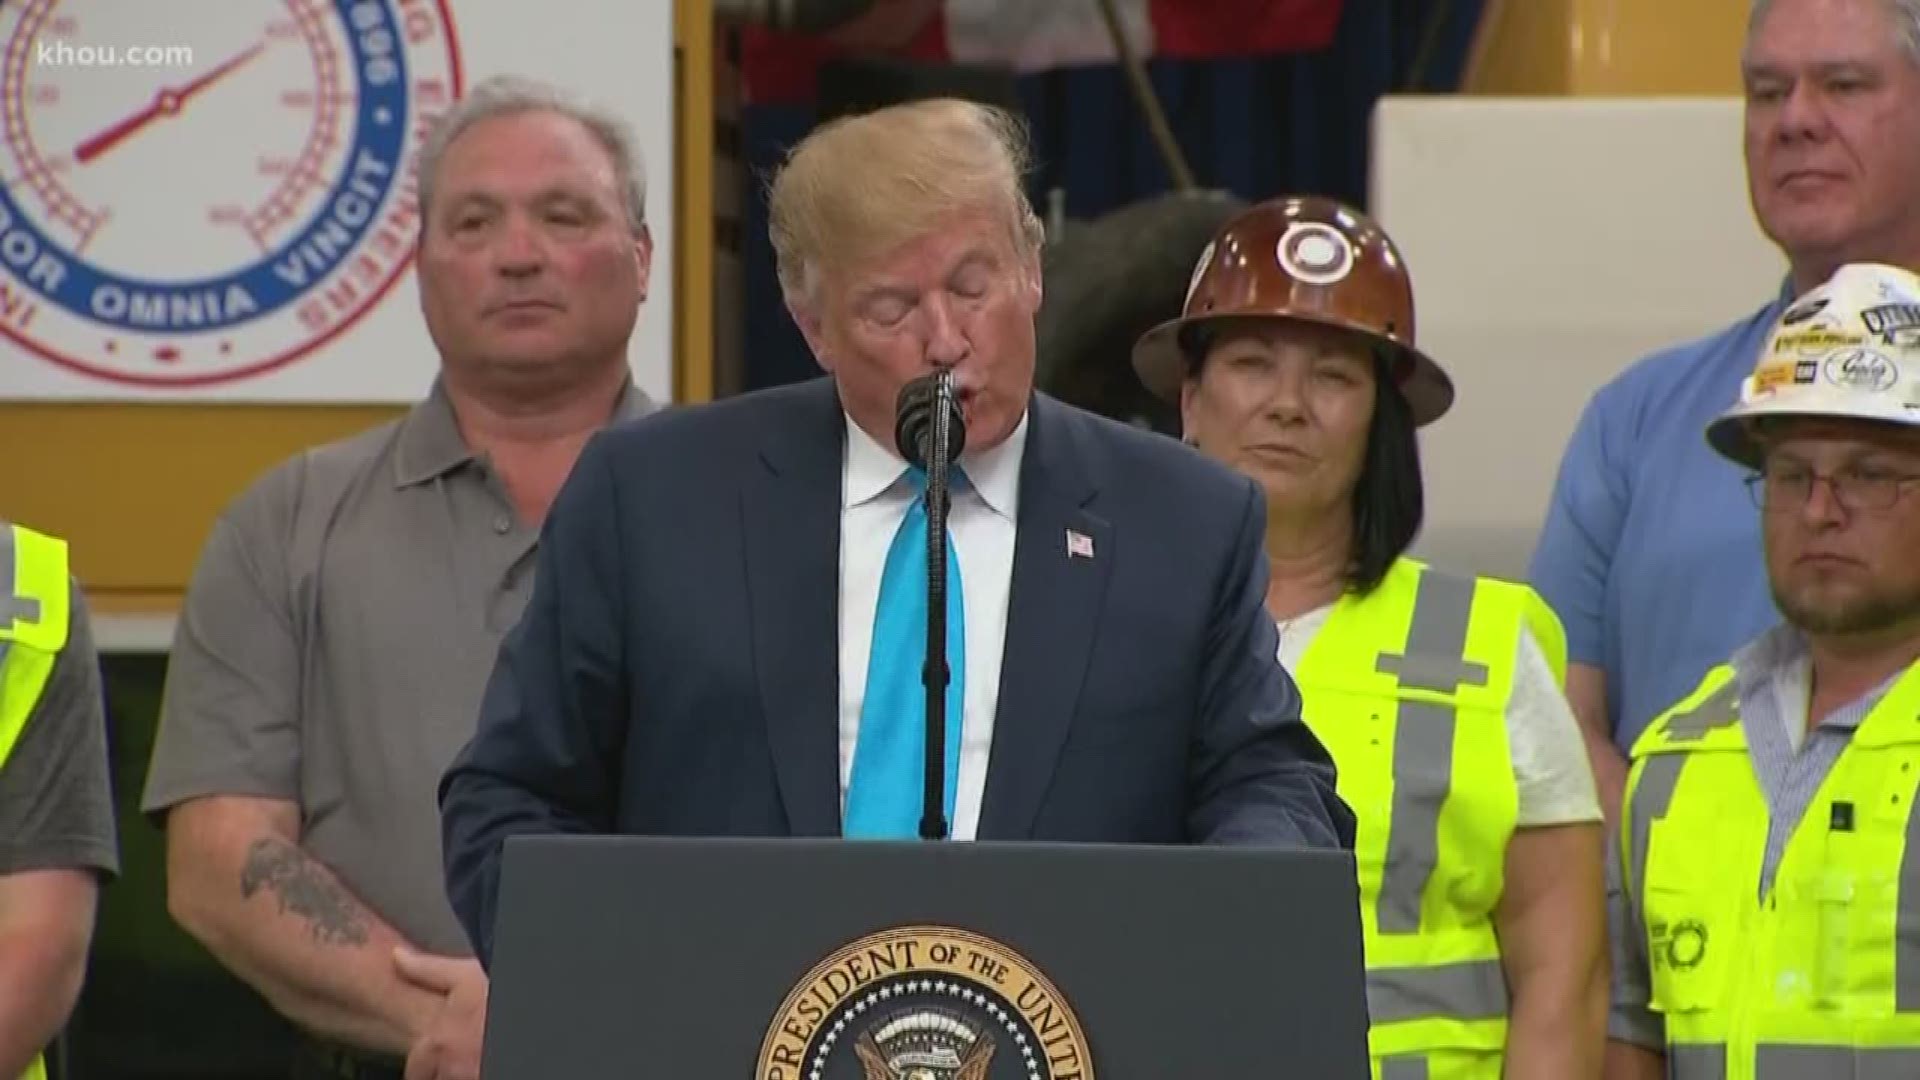 The President made a lot of claims during his visit to Crosby. KHOU 11 Reporter Janelle Bludau is verifying some of the things he said in his speech.